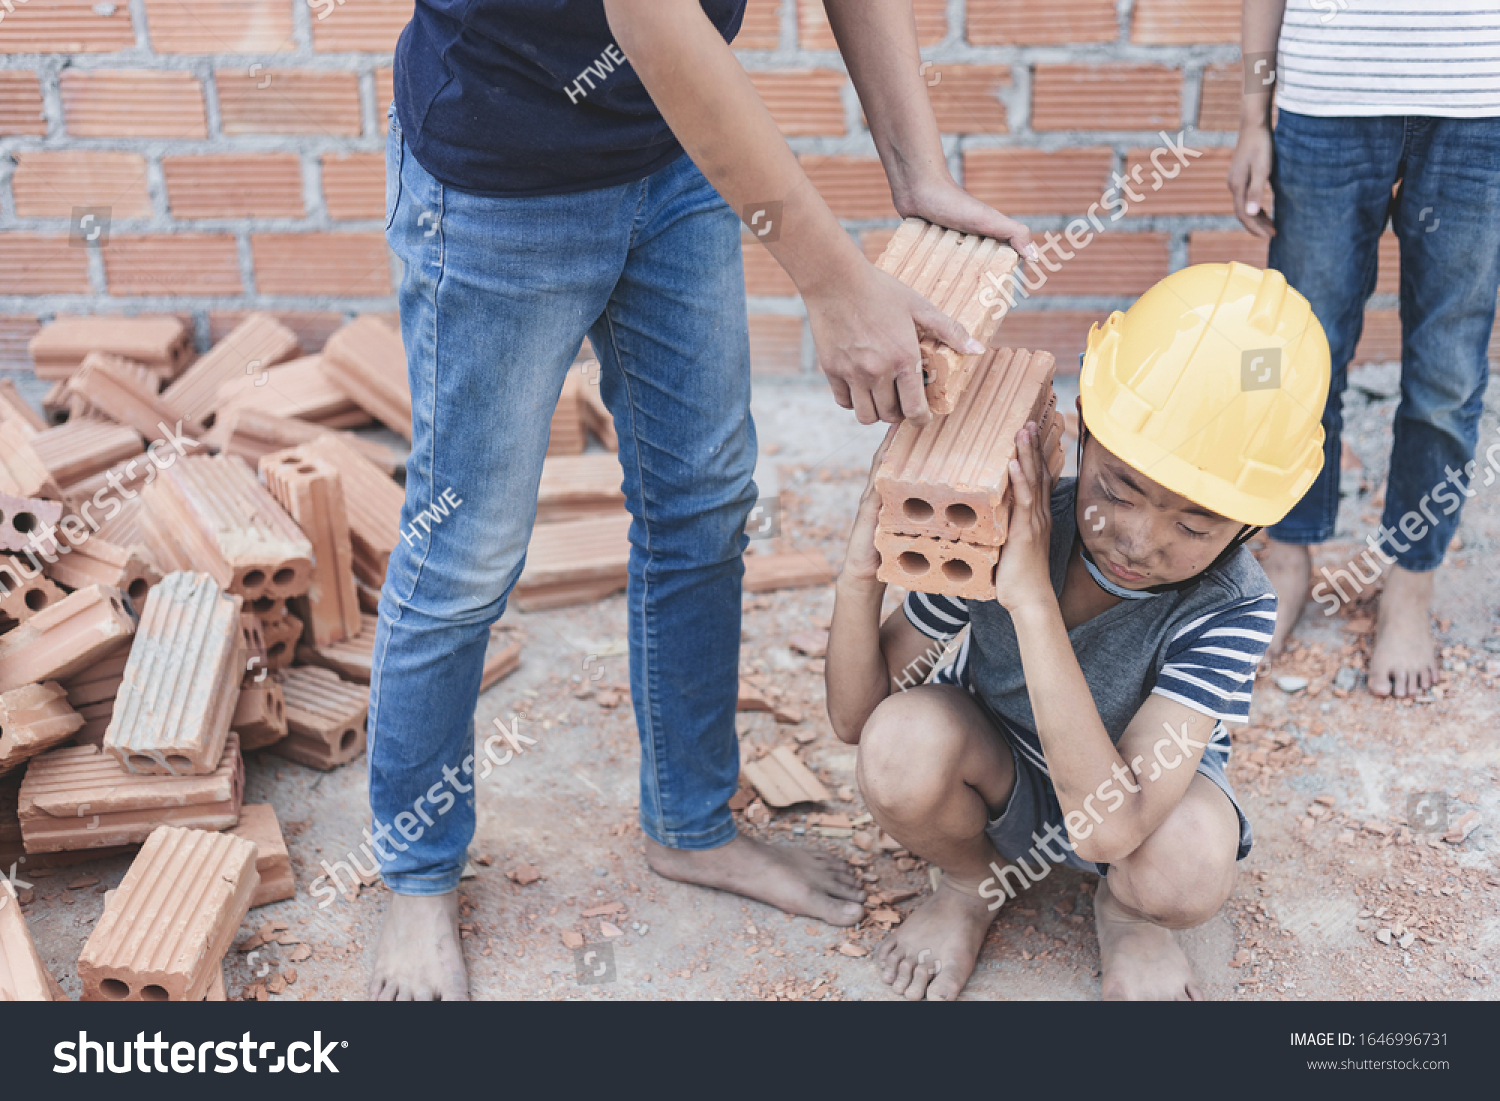 Children working at construction site for world day against child labor concept: #1646996731